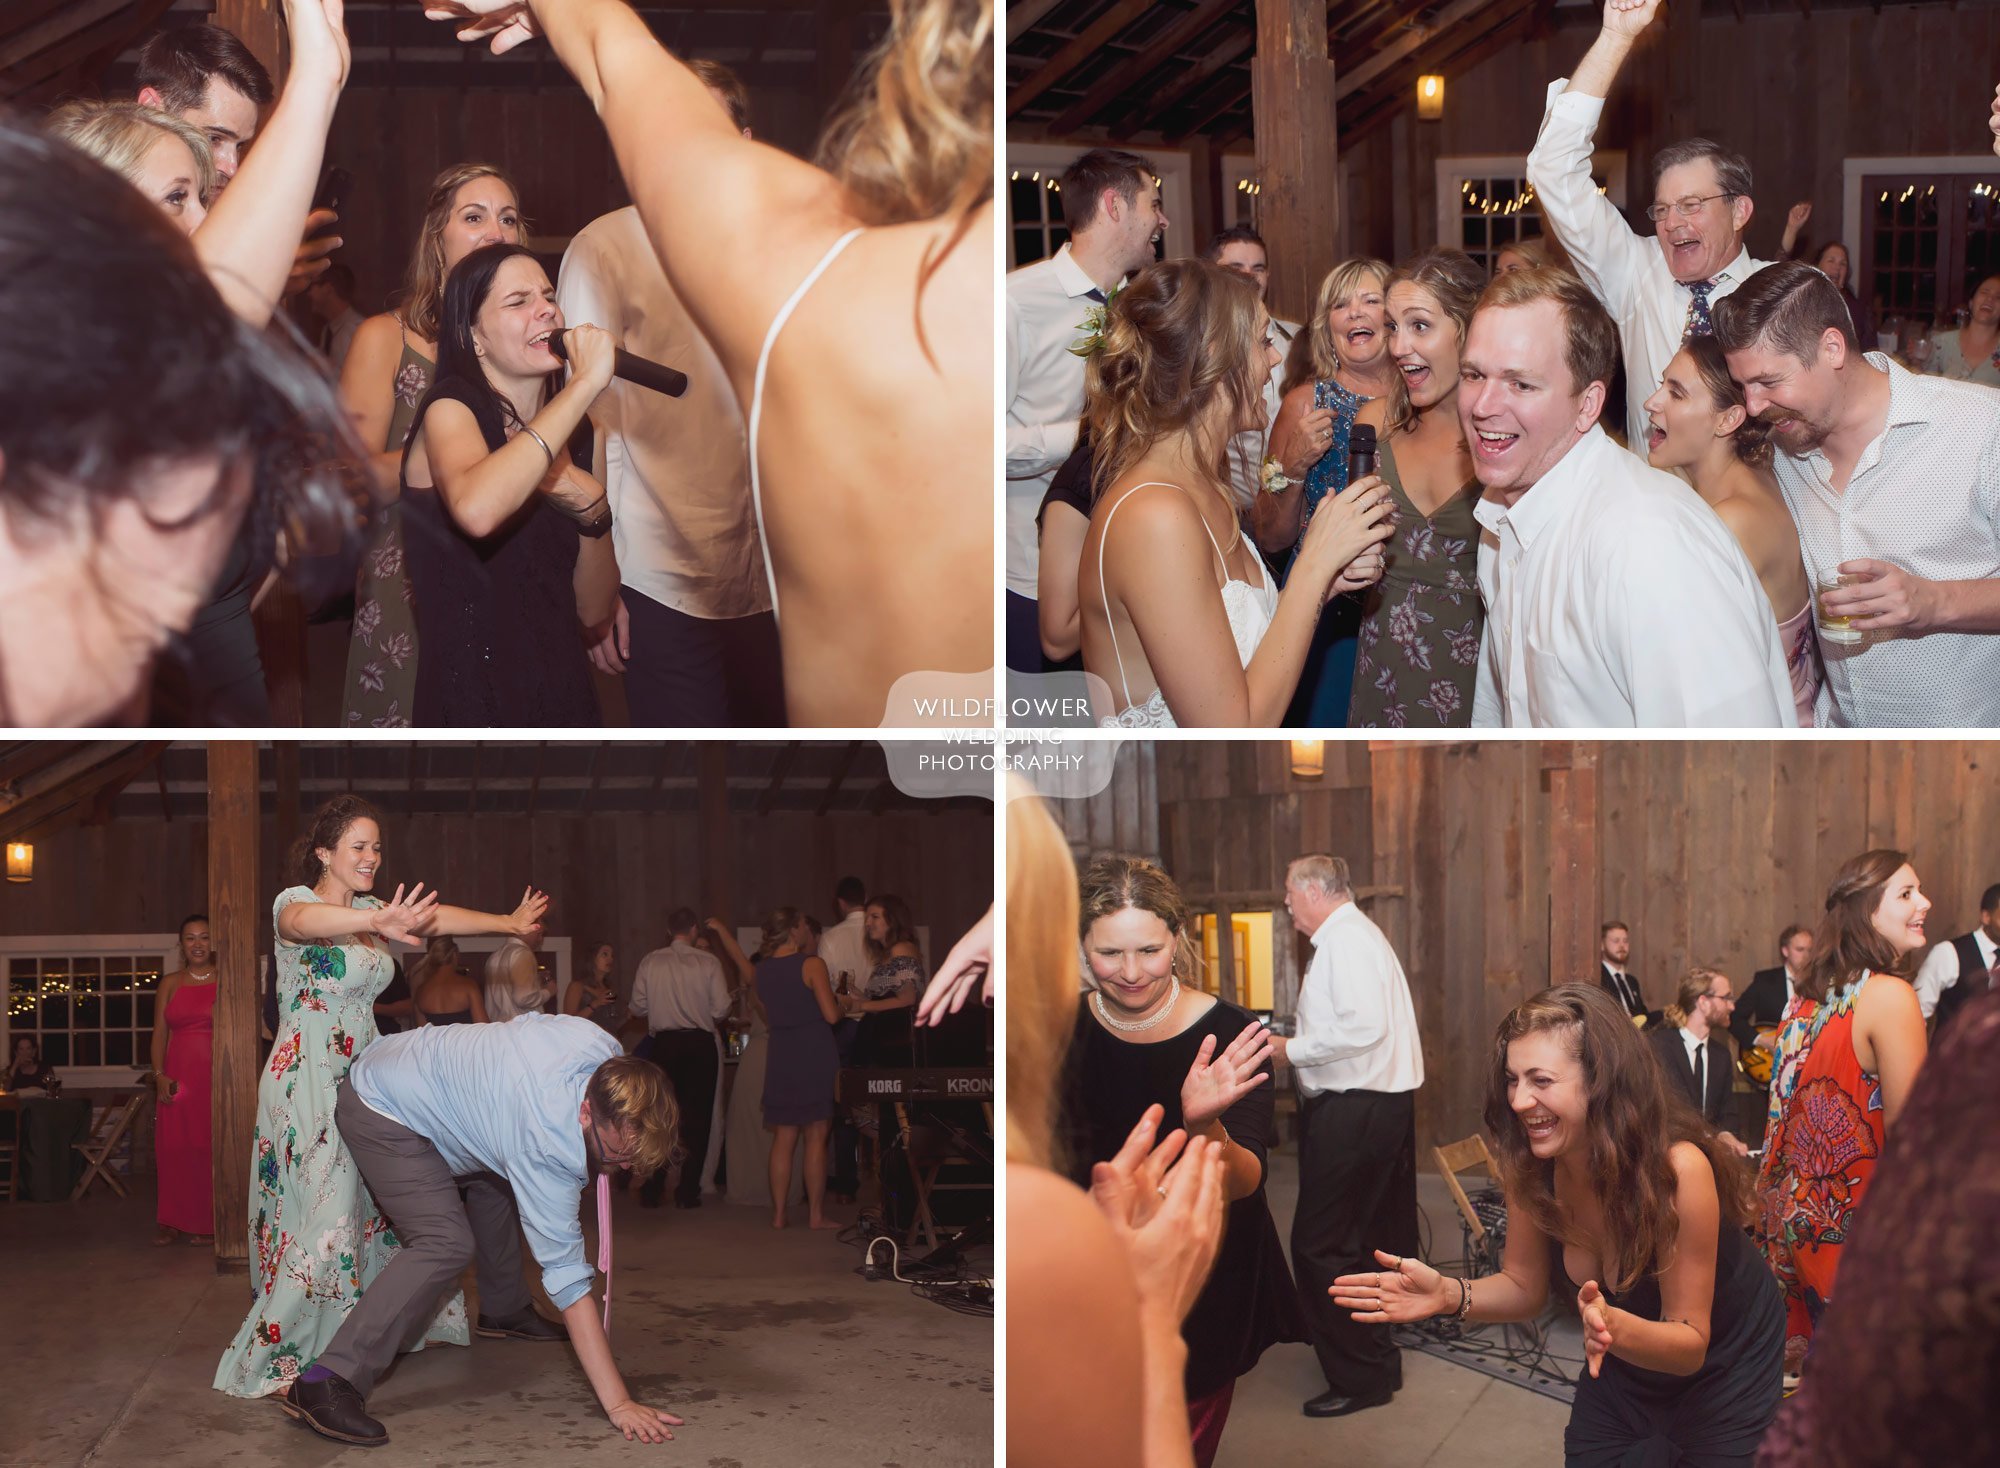 Candid moments of the wedding guests dirty dancing at the Weston Red Barn venue.